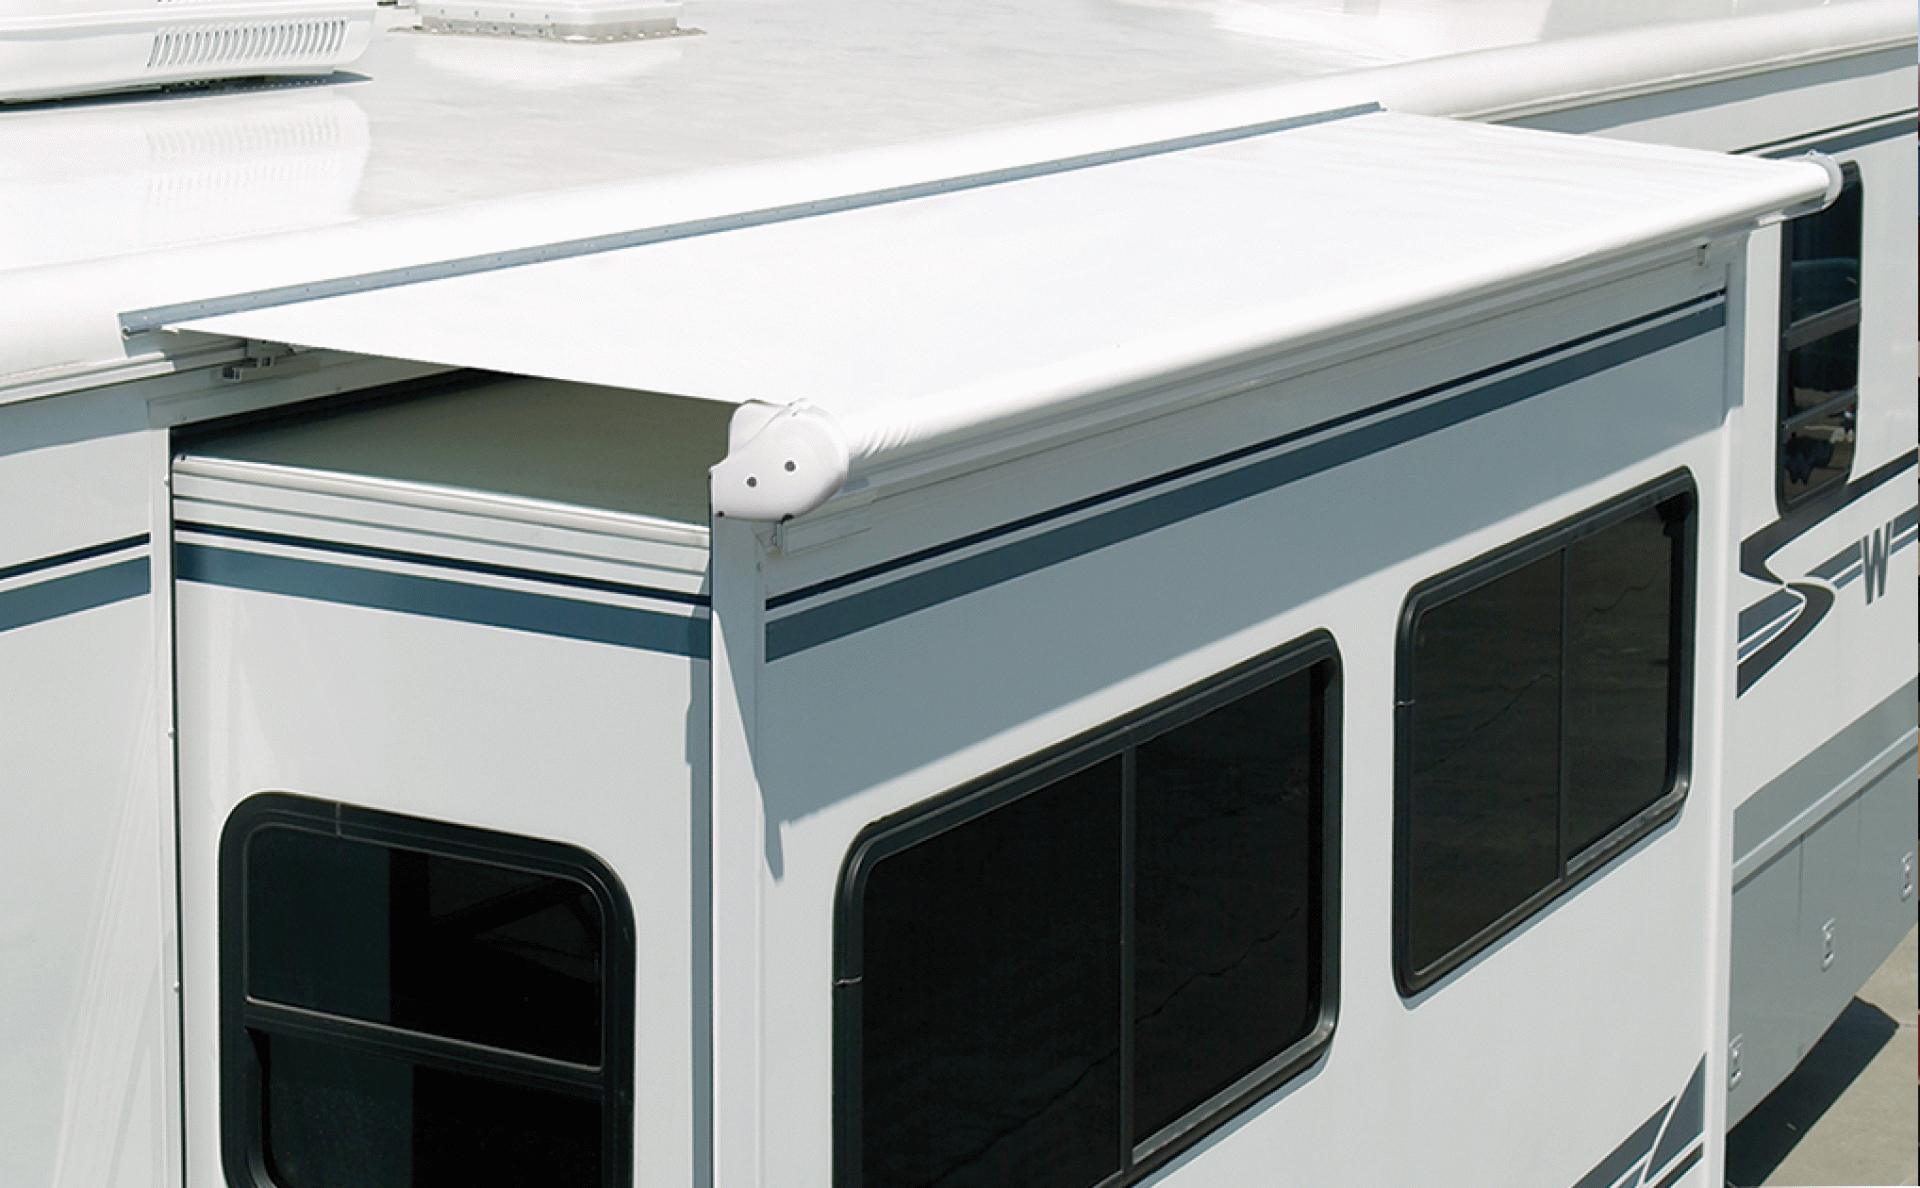 CAREFREE OF COLORADO | UQ1330025 | SIDEOUT KOVER III AWNING 126' - 133" ROOF RANGE WHITE VINYL FABRIC & DEFLECTOR